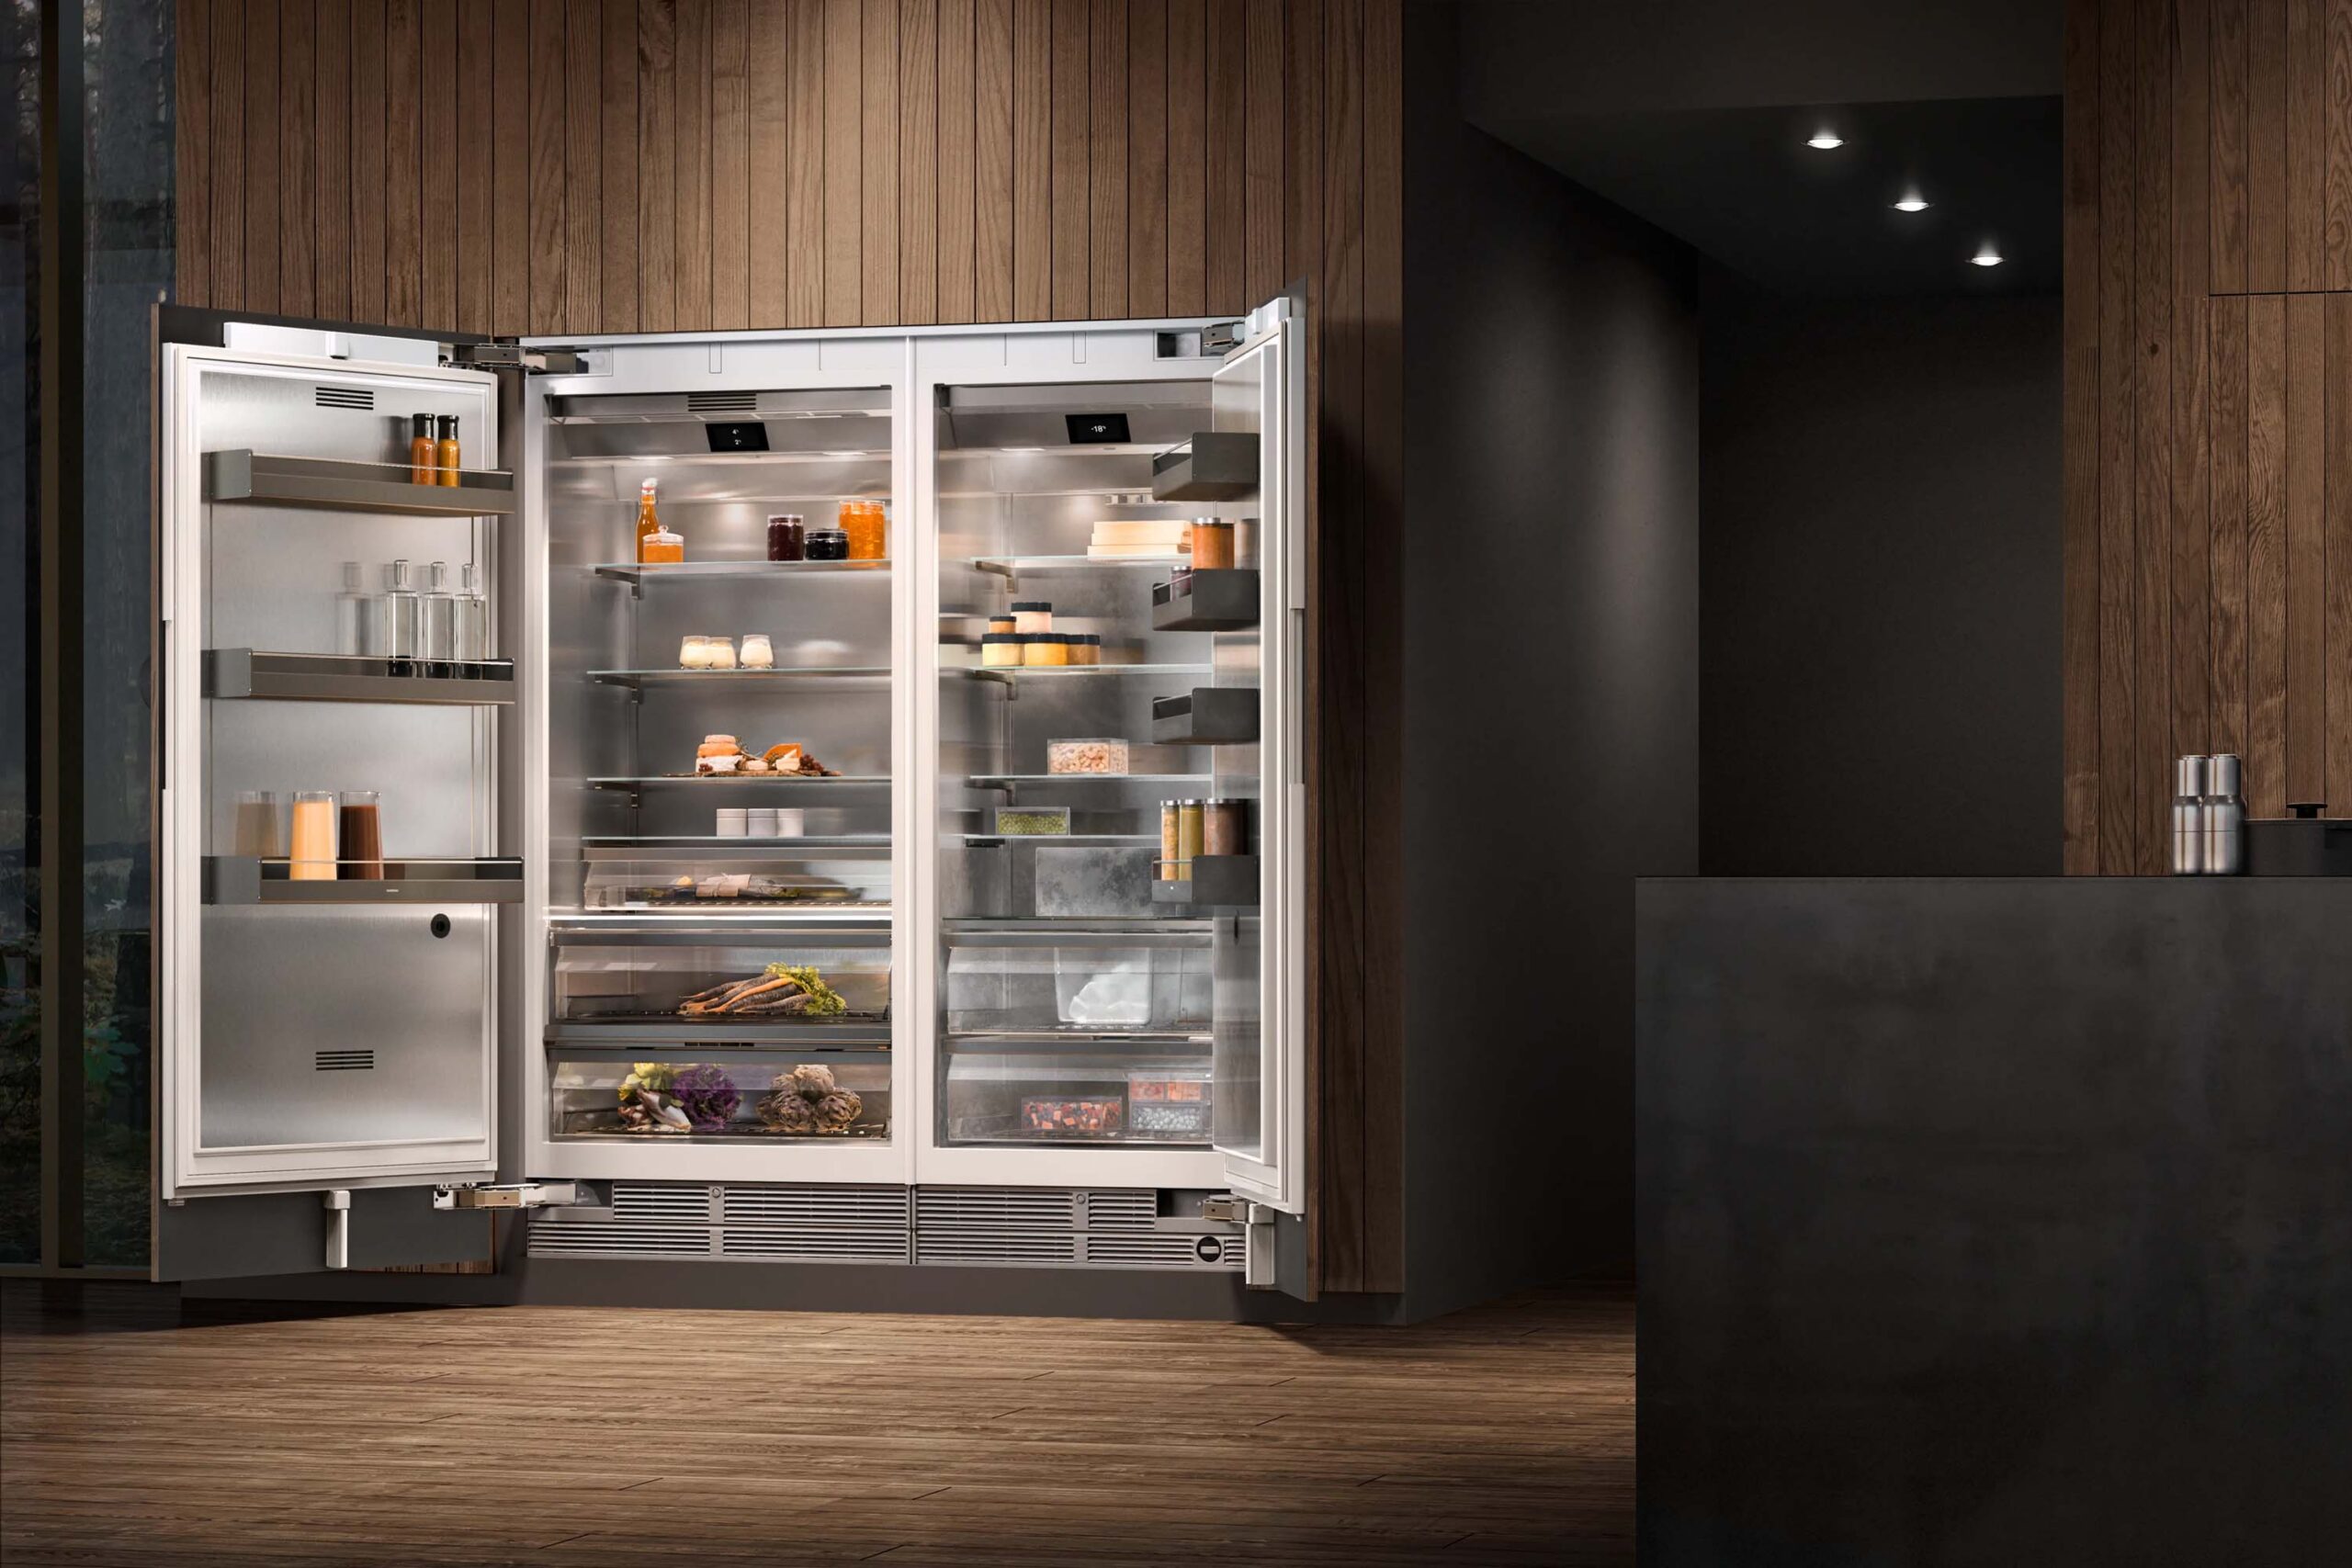 Luxury kitchen appliance brand Gaggenau 400 series Free standing / Integrated Freezer. Buy in the UK with Krieder.